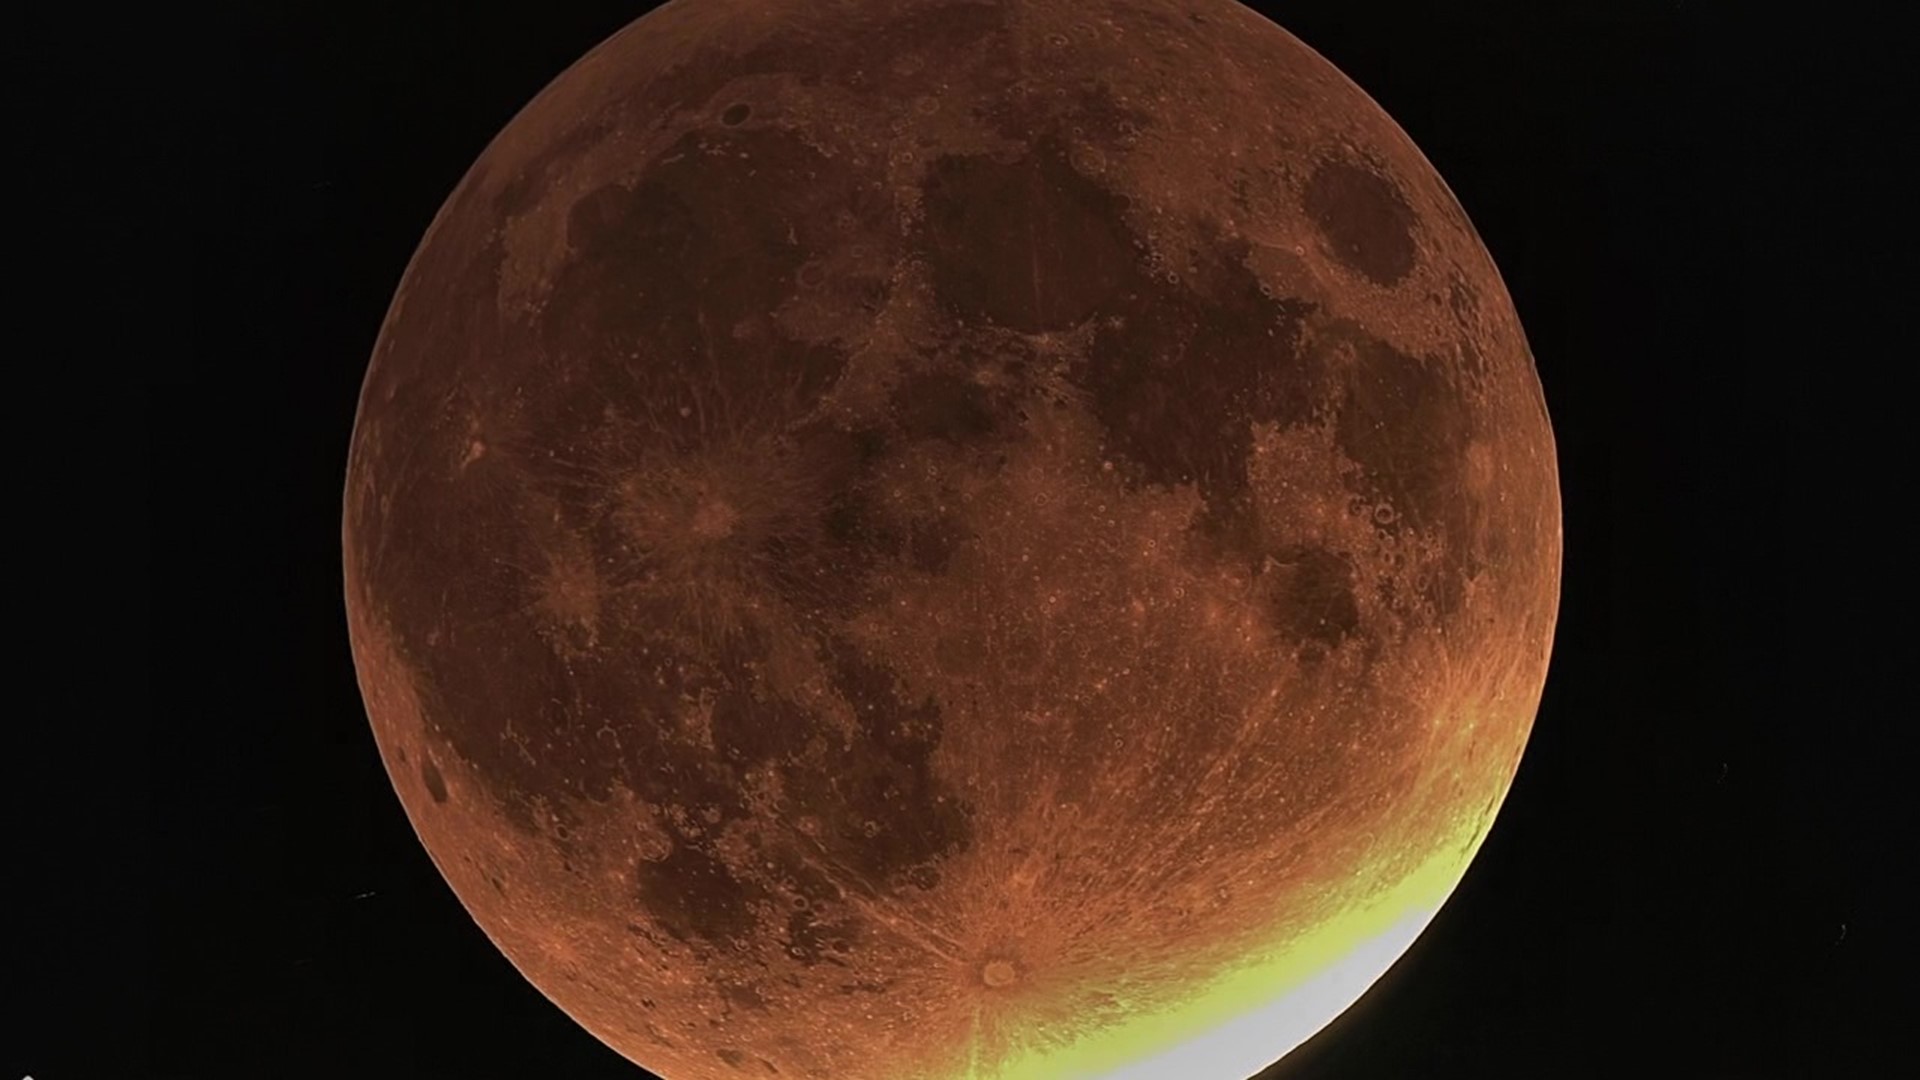 Skywatchers can soon see our moon turn a deep red. Newswatch 16's John Hickey shows us what's causing this and how long it will last in this week's Skywatch 16.